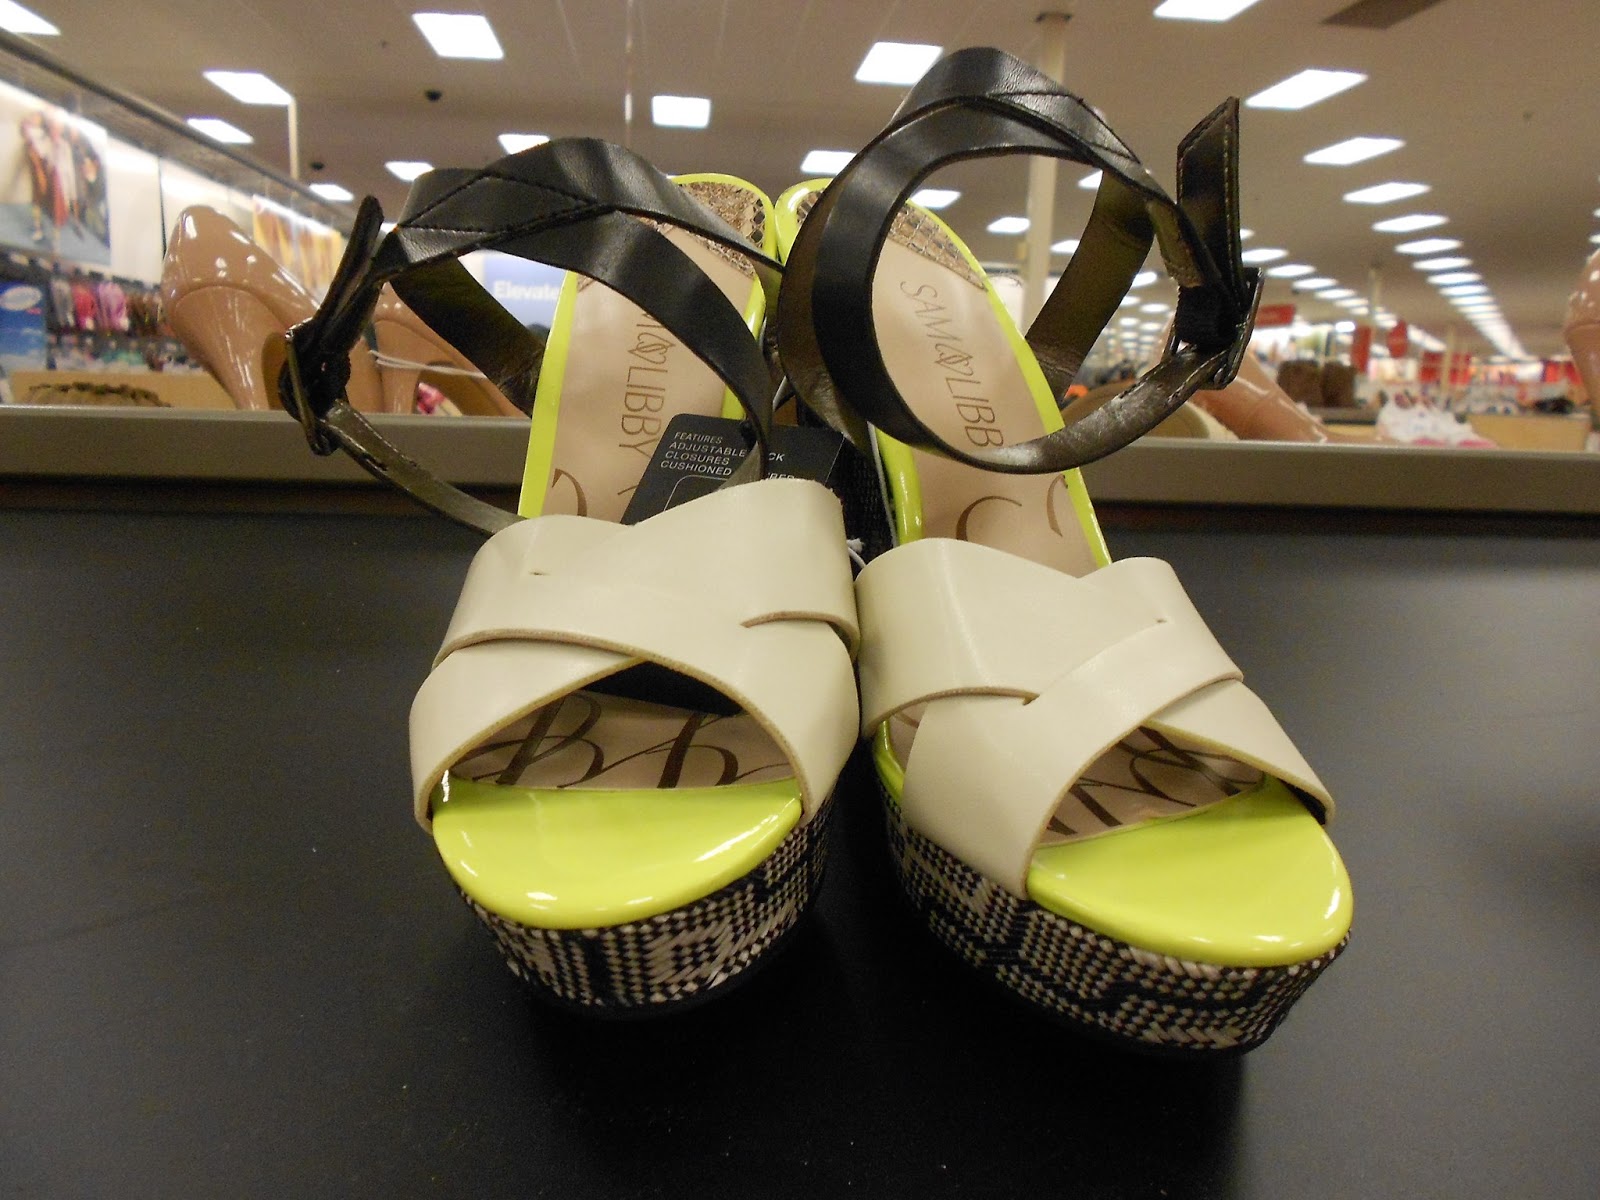 Tracy's Notebook of Style: Sam & Libby for Target Shoe Collection